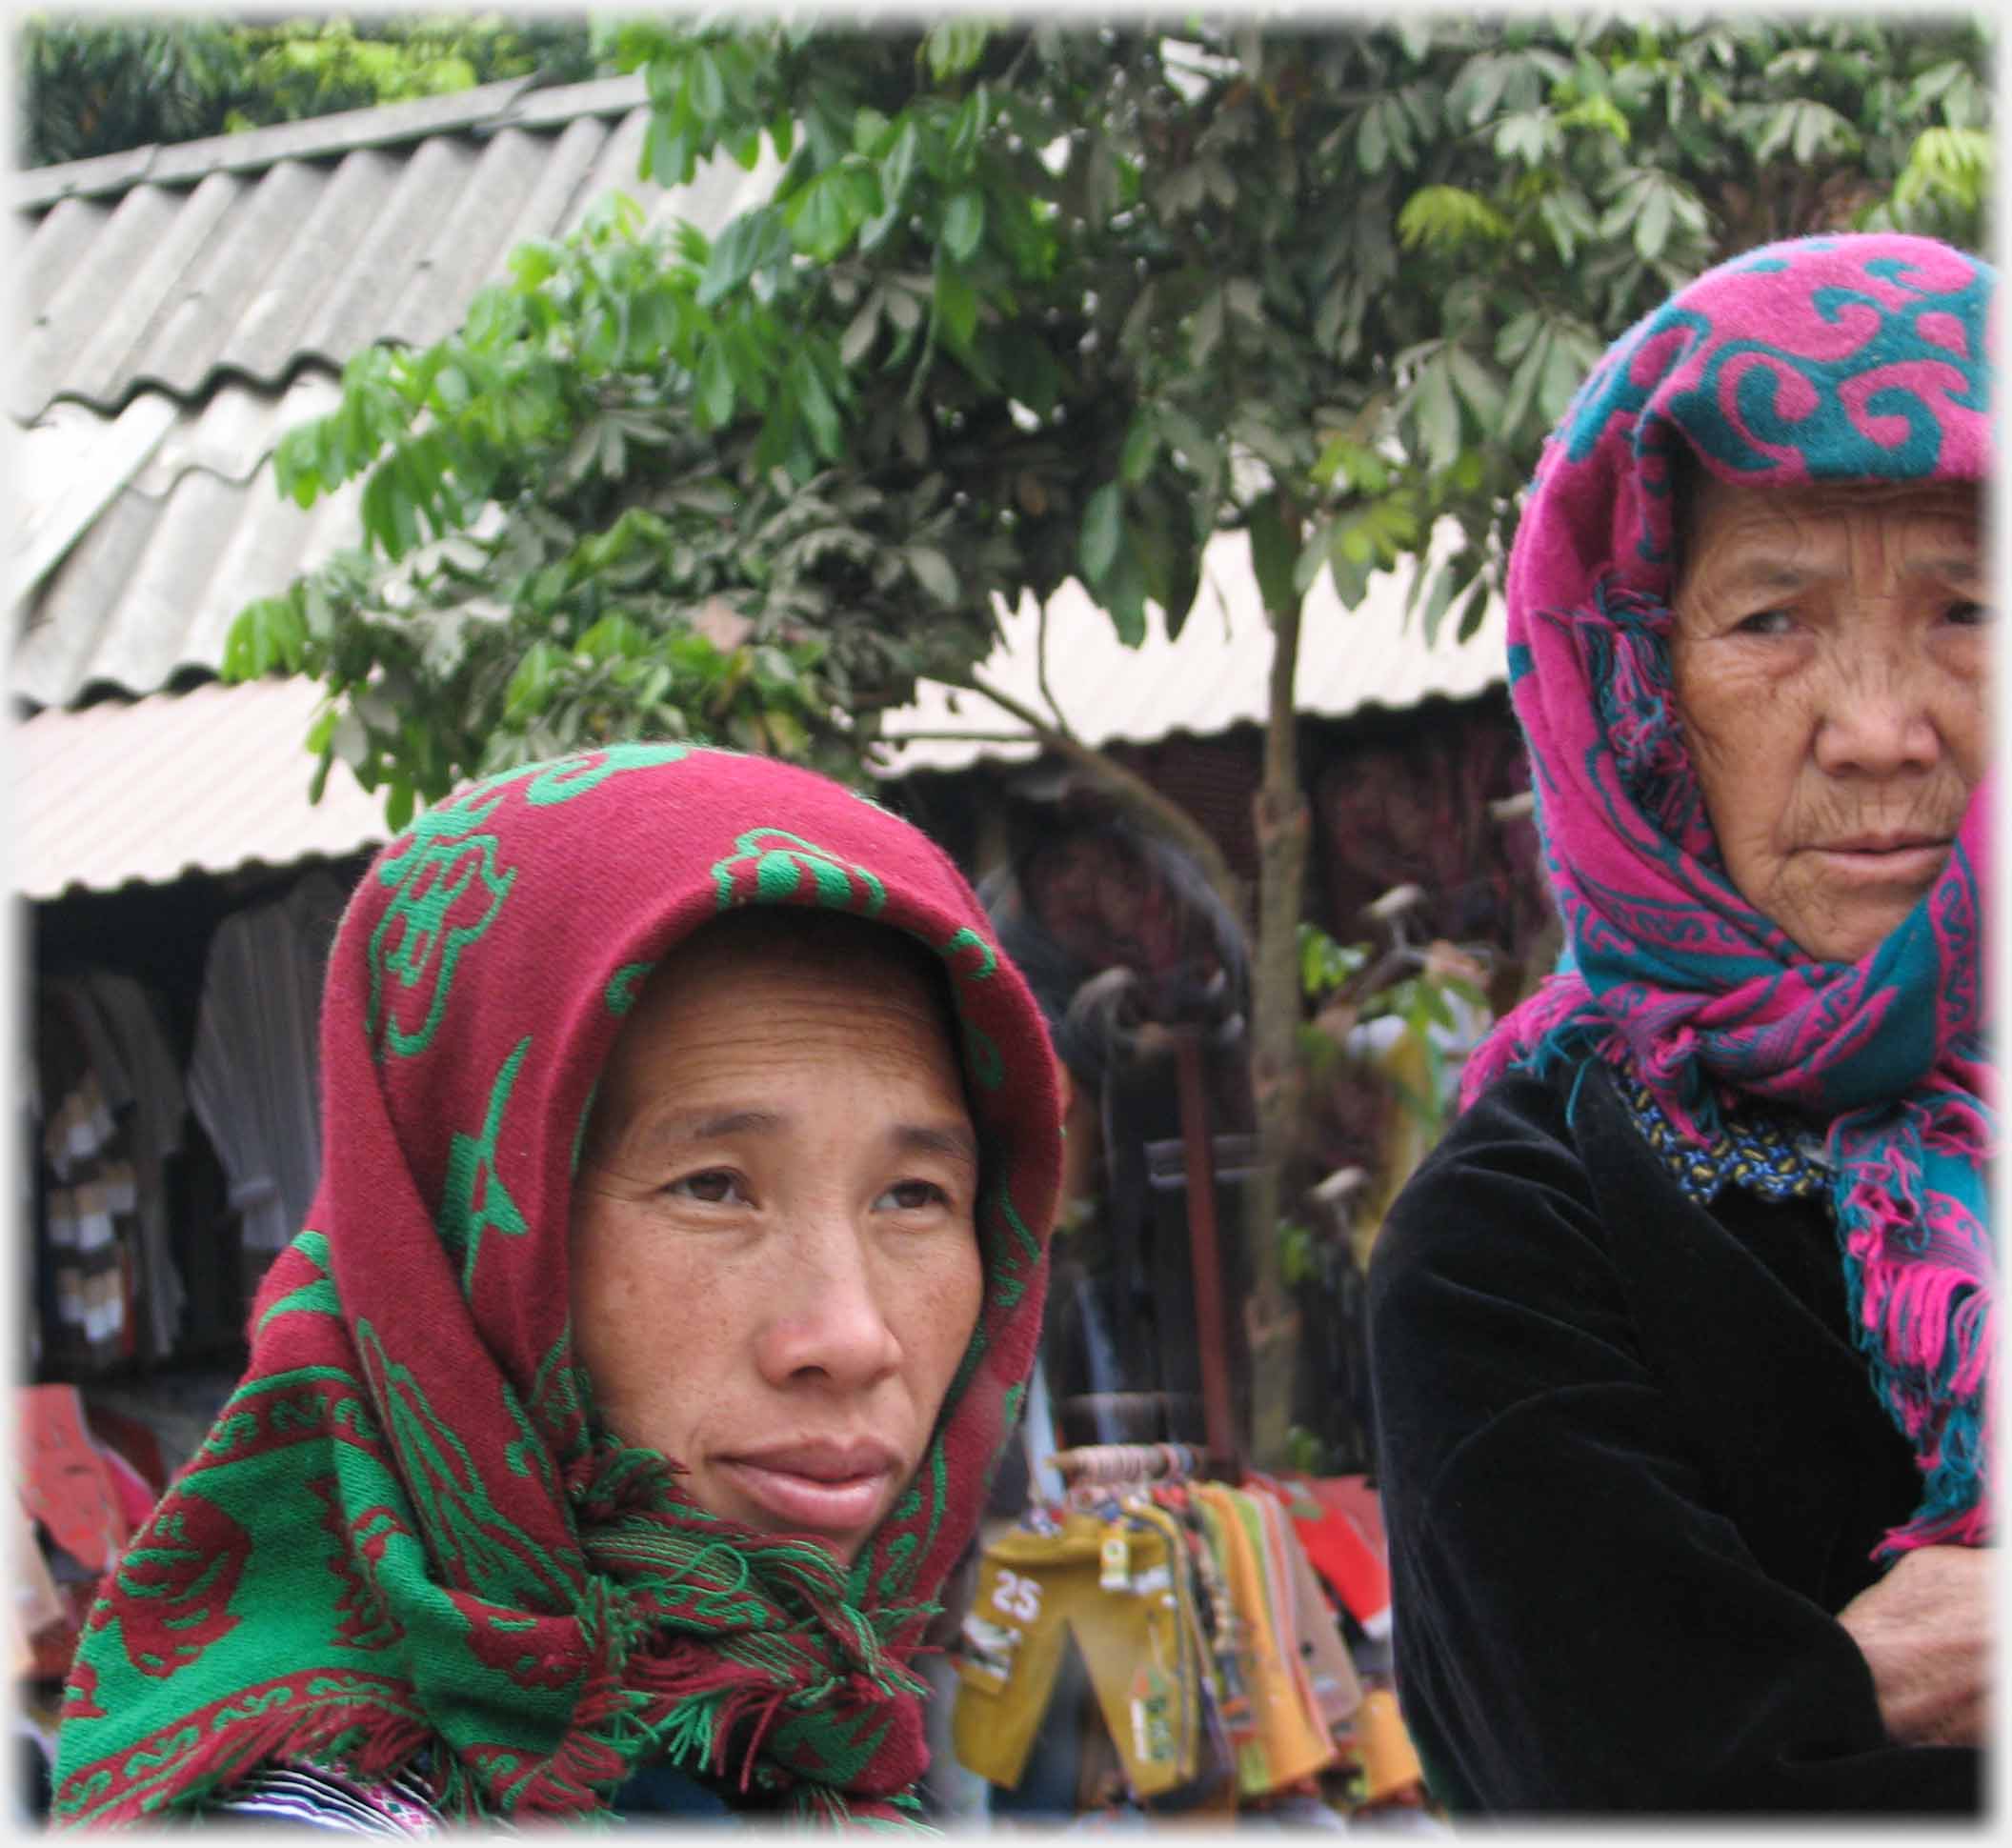 Portrait of women in head scarfs. Older woman looking askance at younger woman.